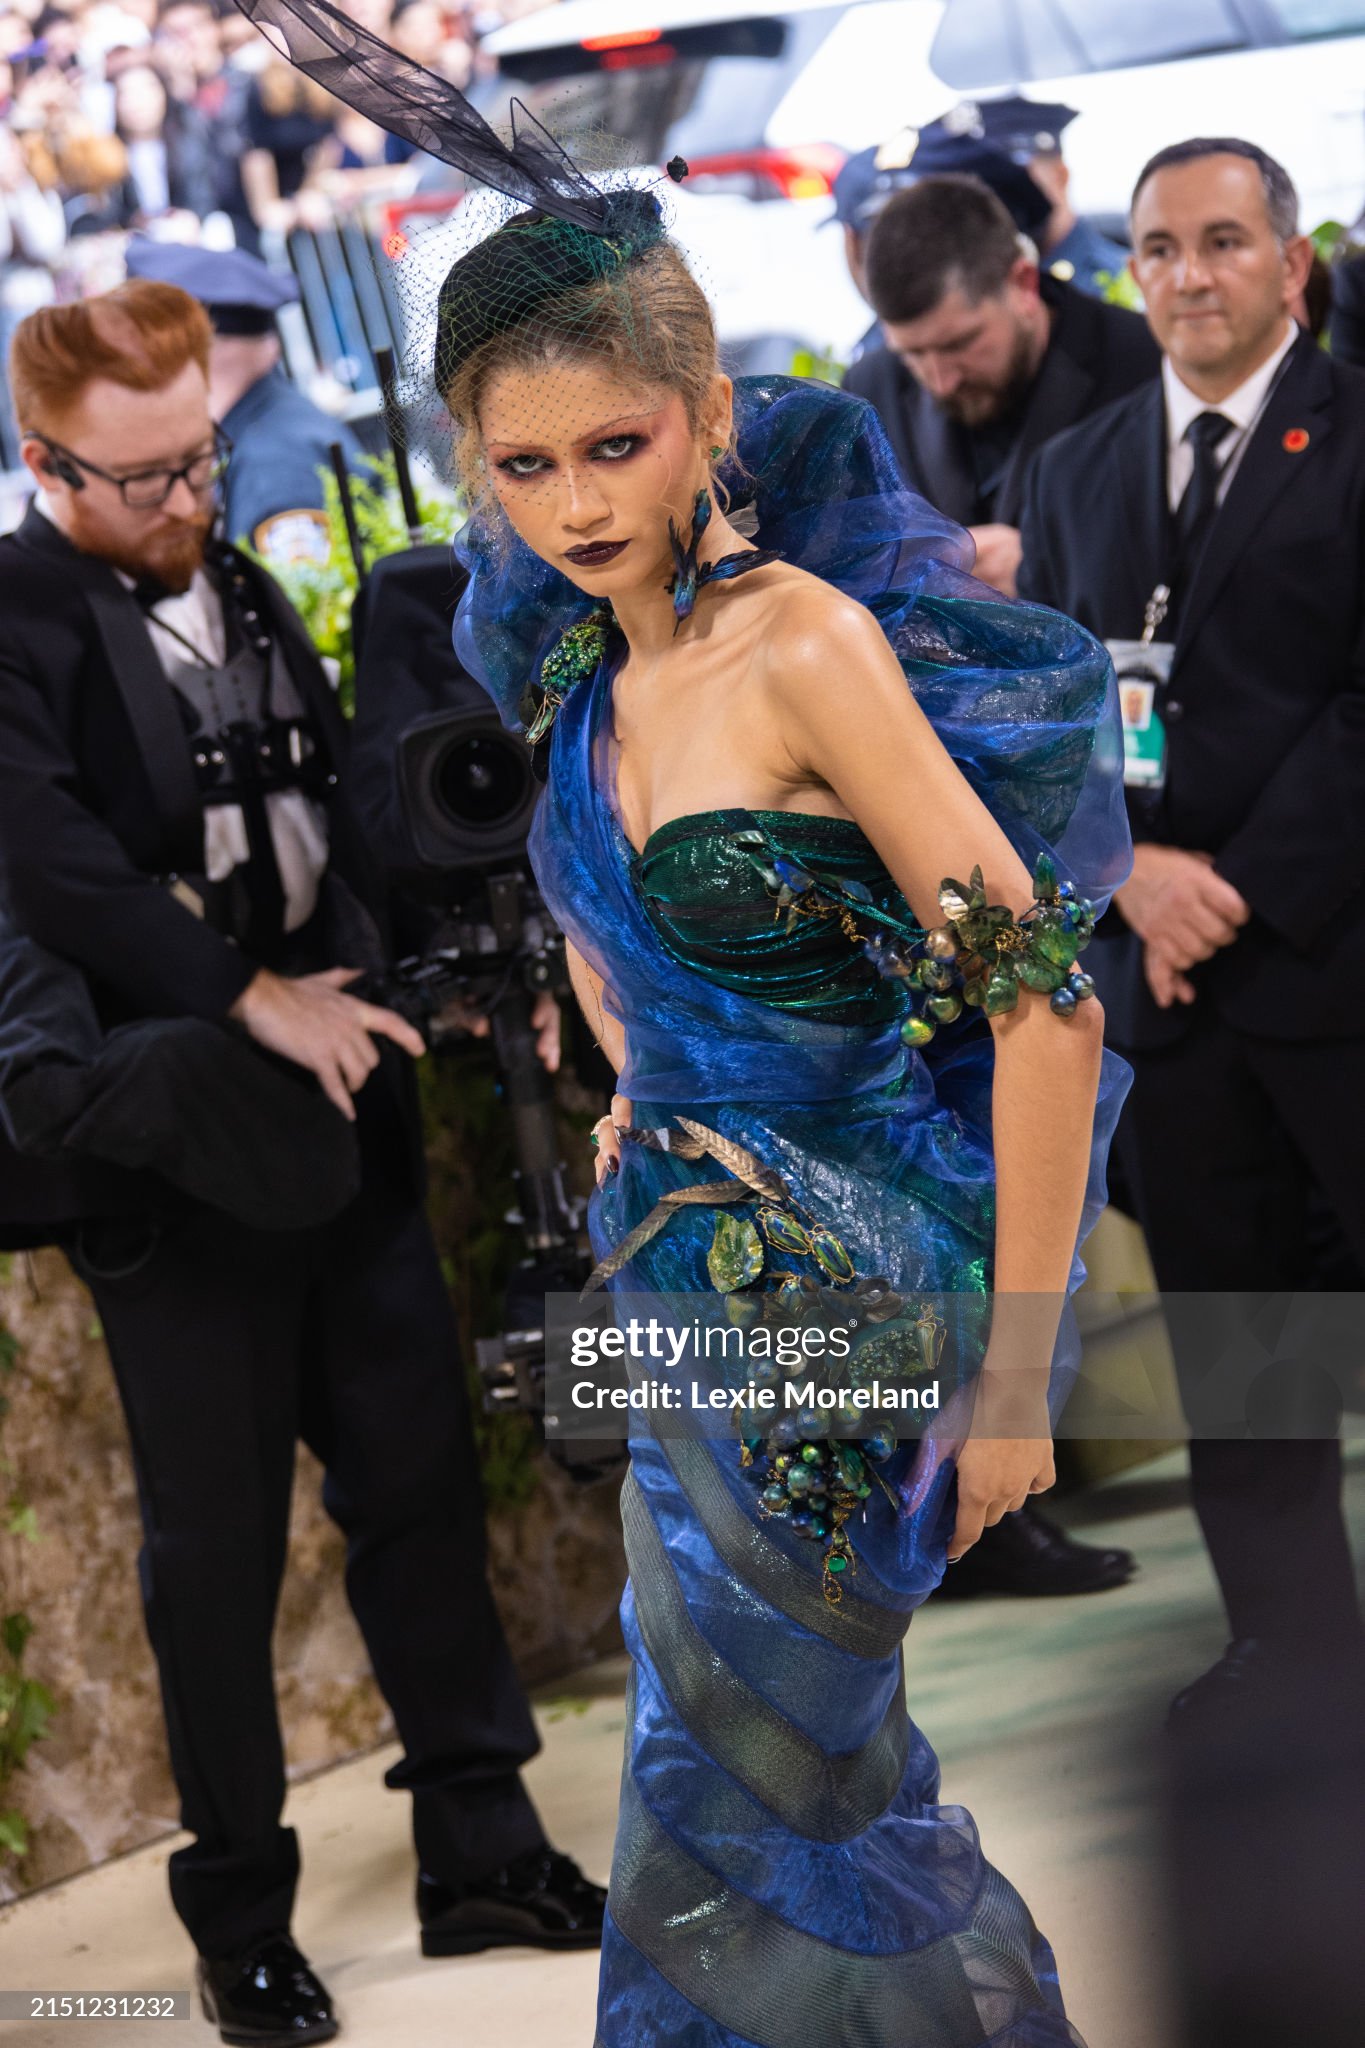 gettyimages-2151231232-2048x2048.jpg